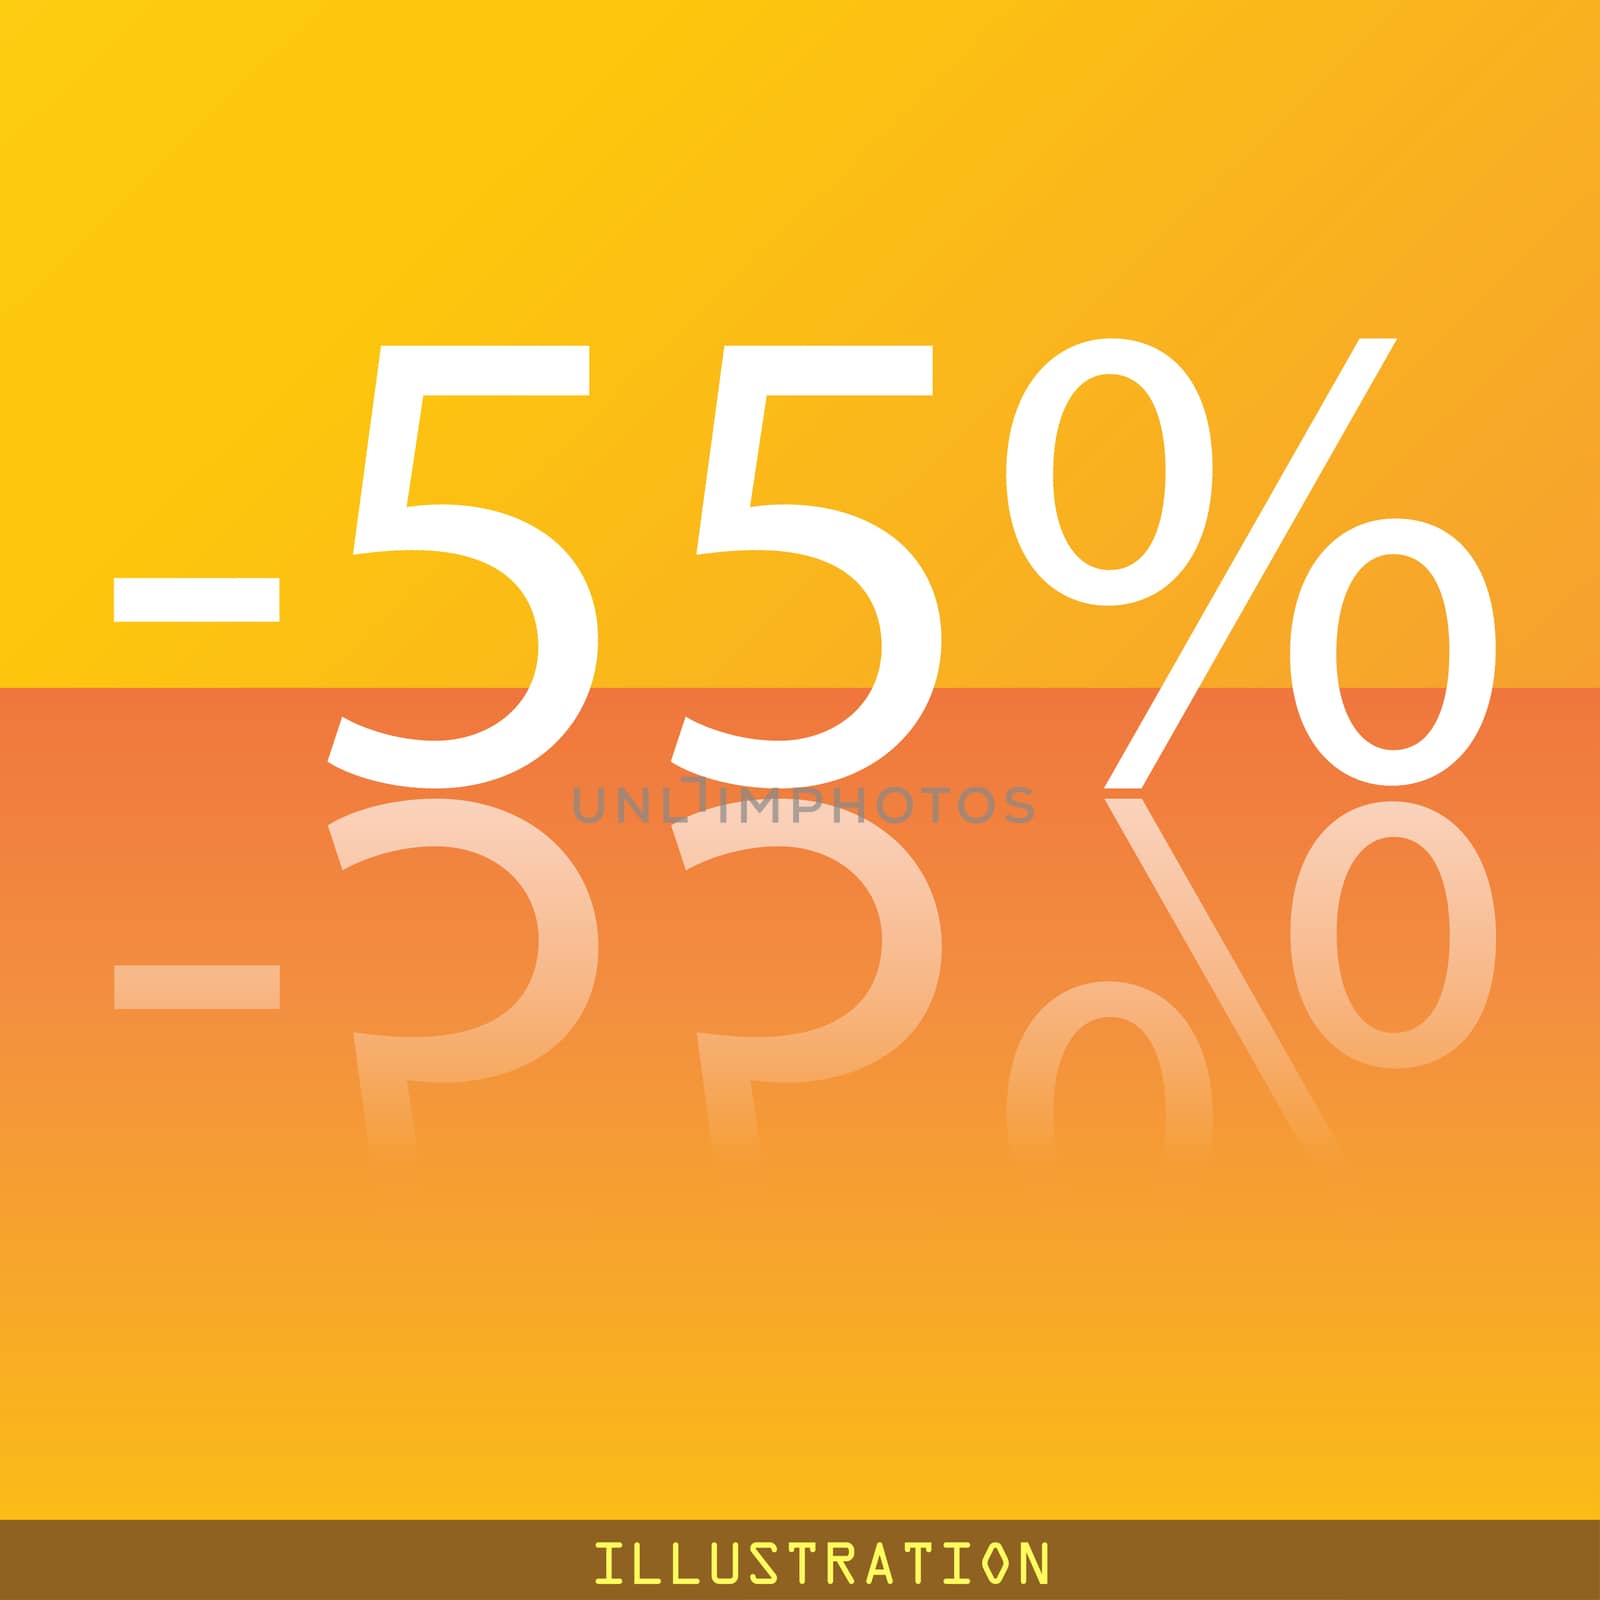 55 percent discount icon symbol Flat modern web design with reflection and space for your text. illustration. Raster version